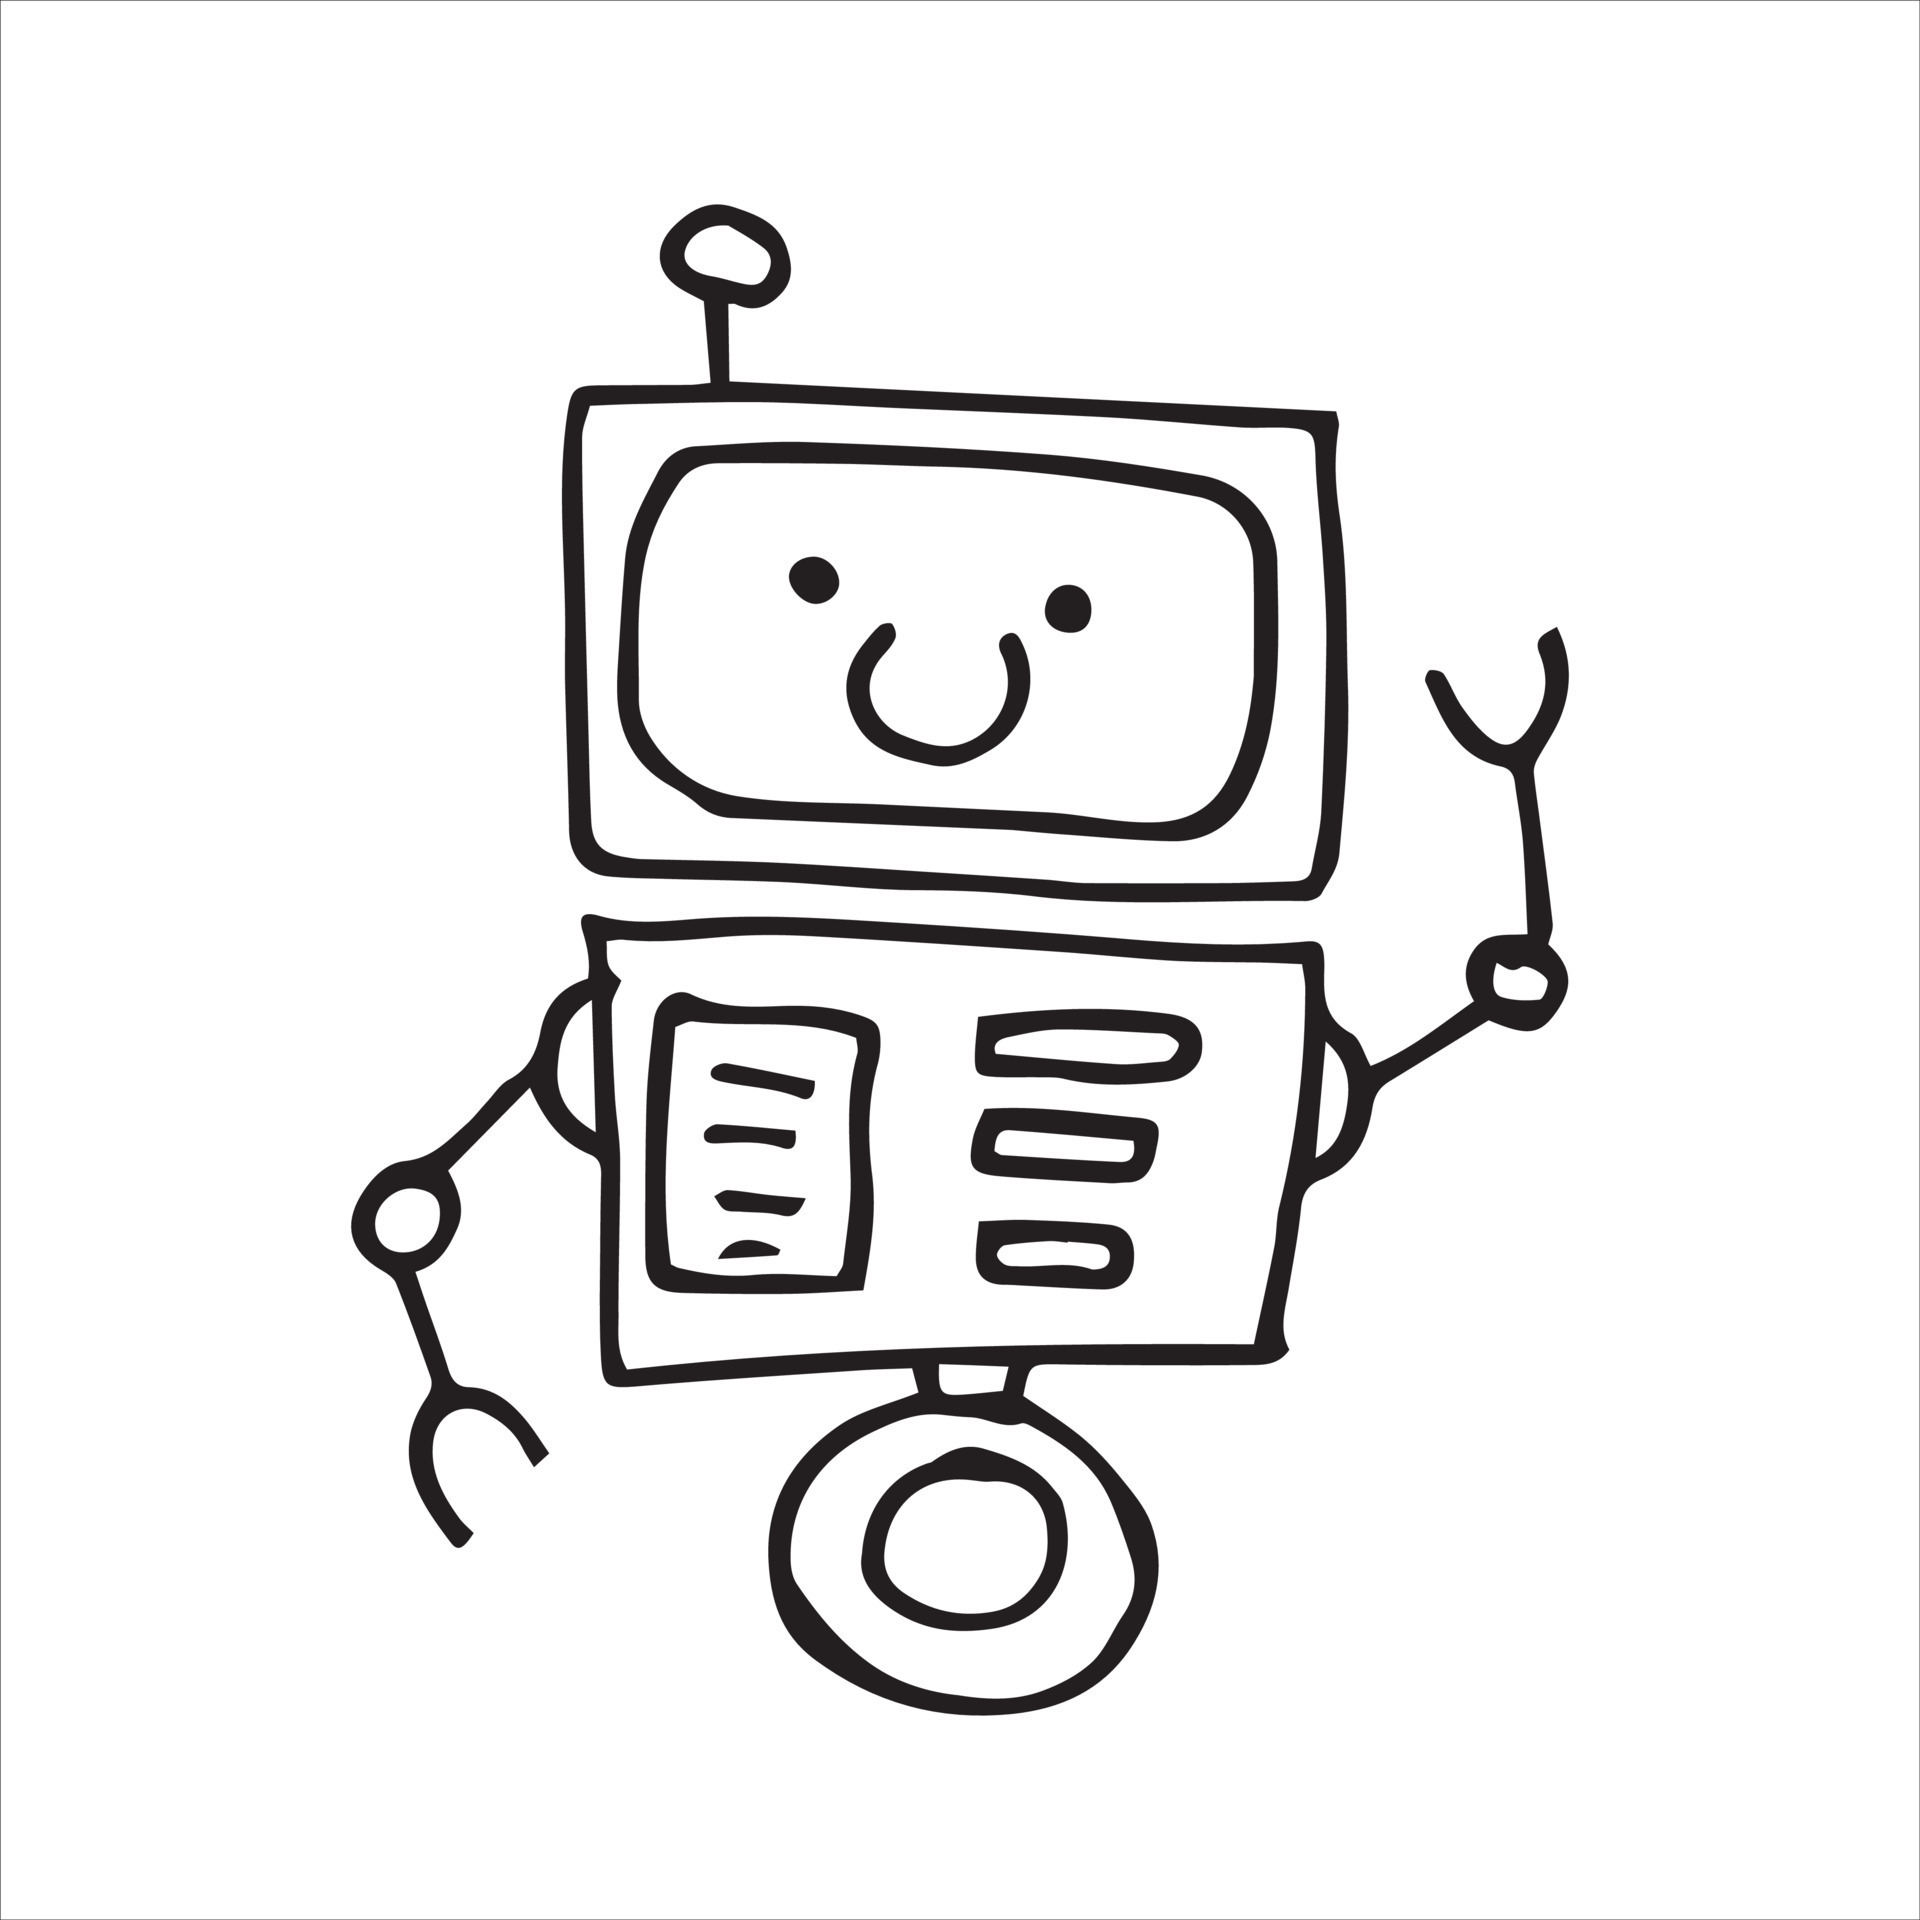 https://static.vecteezy.com/system/resources/previews/010/403/265/original/simple-drawing-in-doodle-style-robot-cute-robot-hand-drawn-with-lines-funny-illustration-for-kids-free-vector.jpg